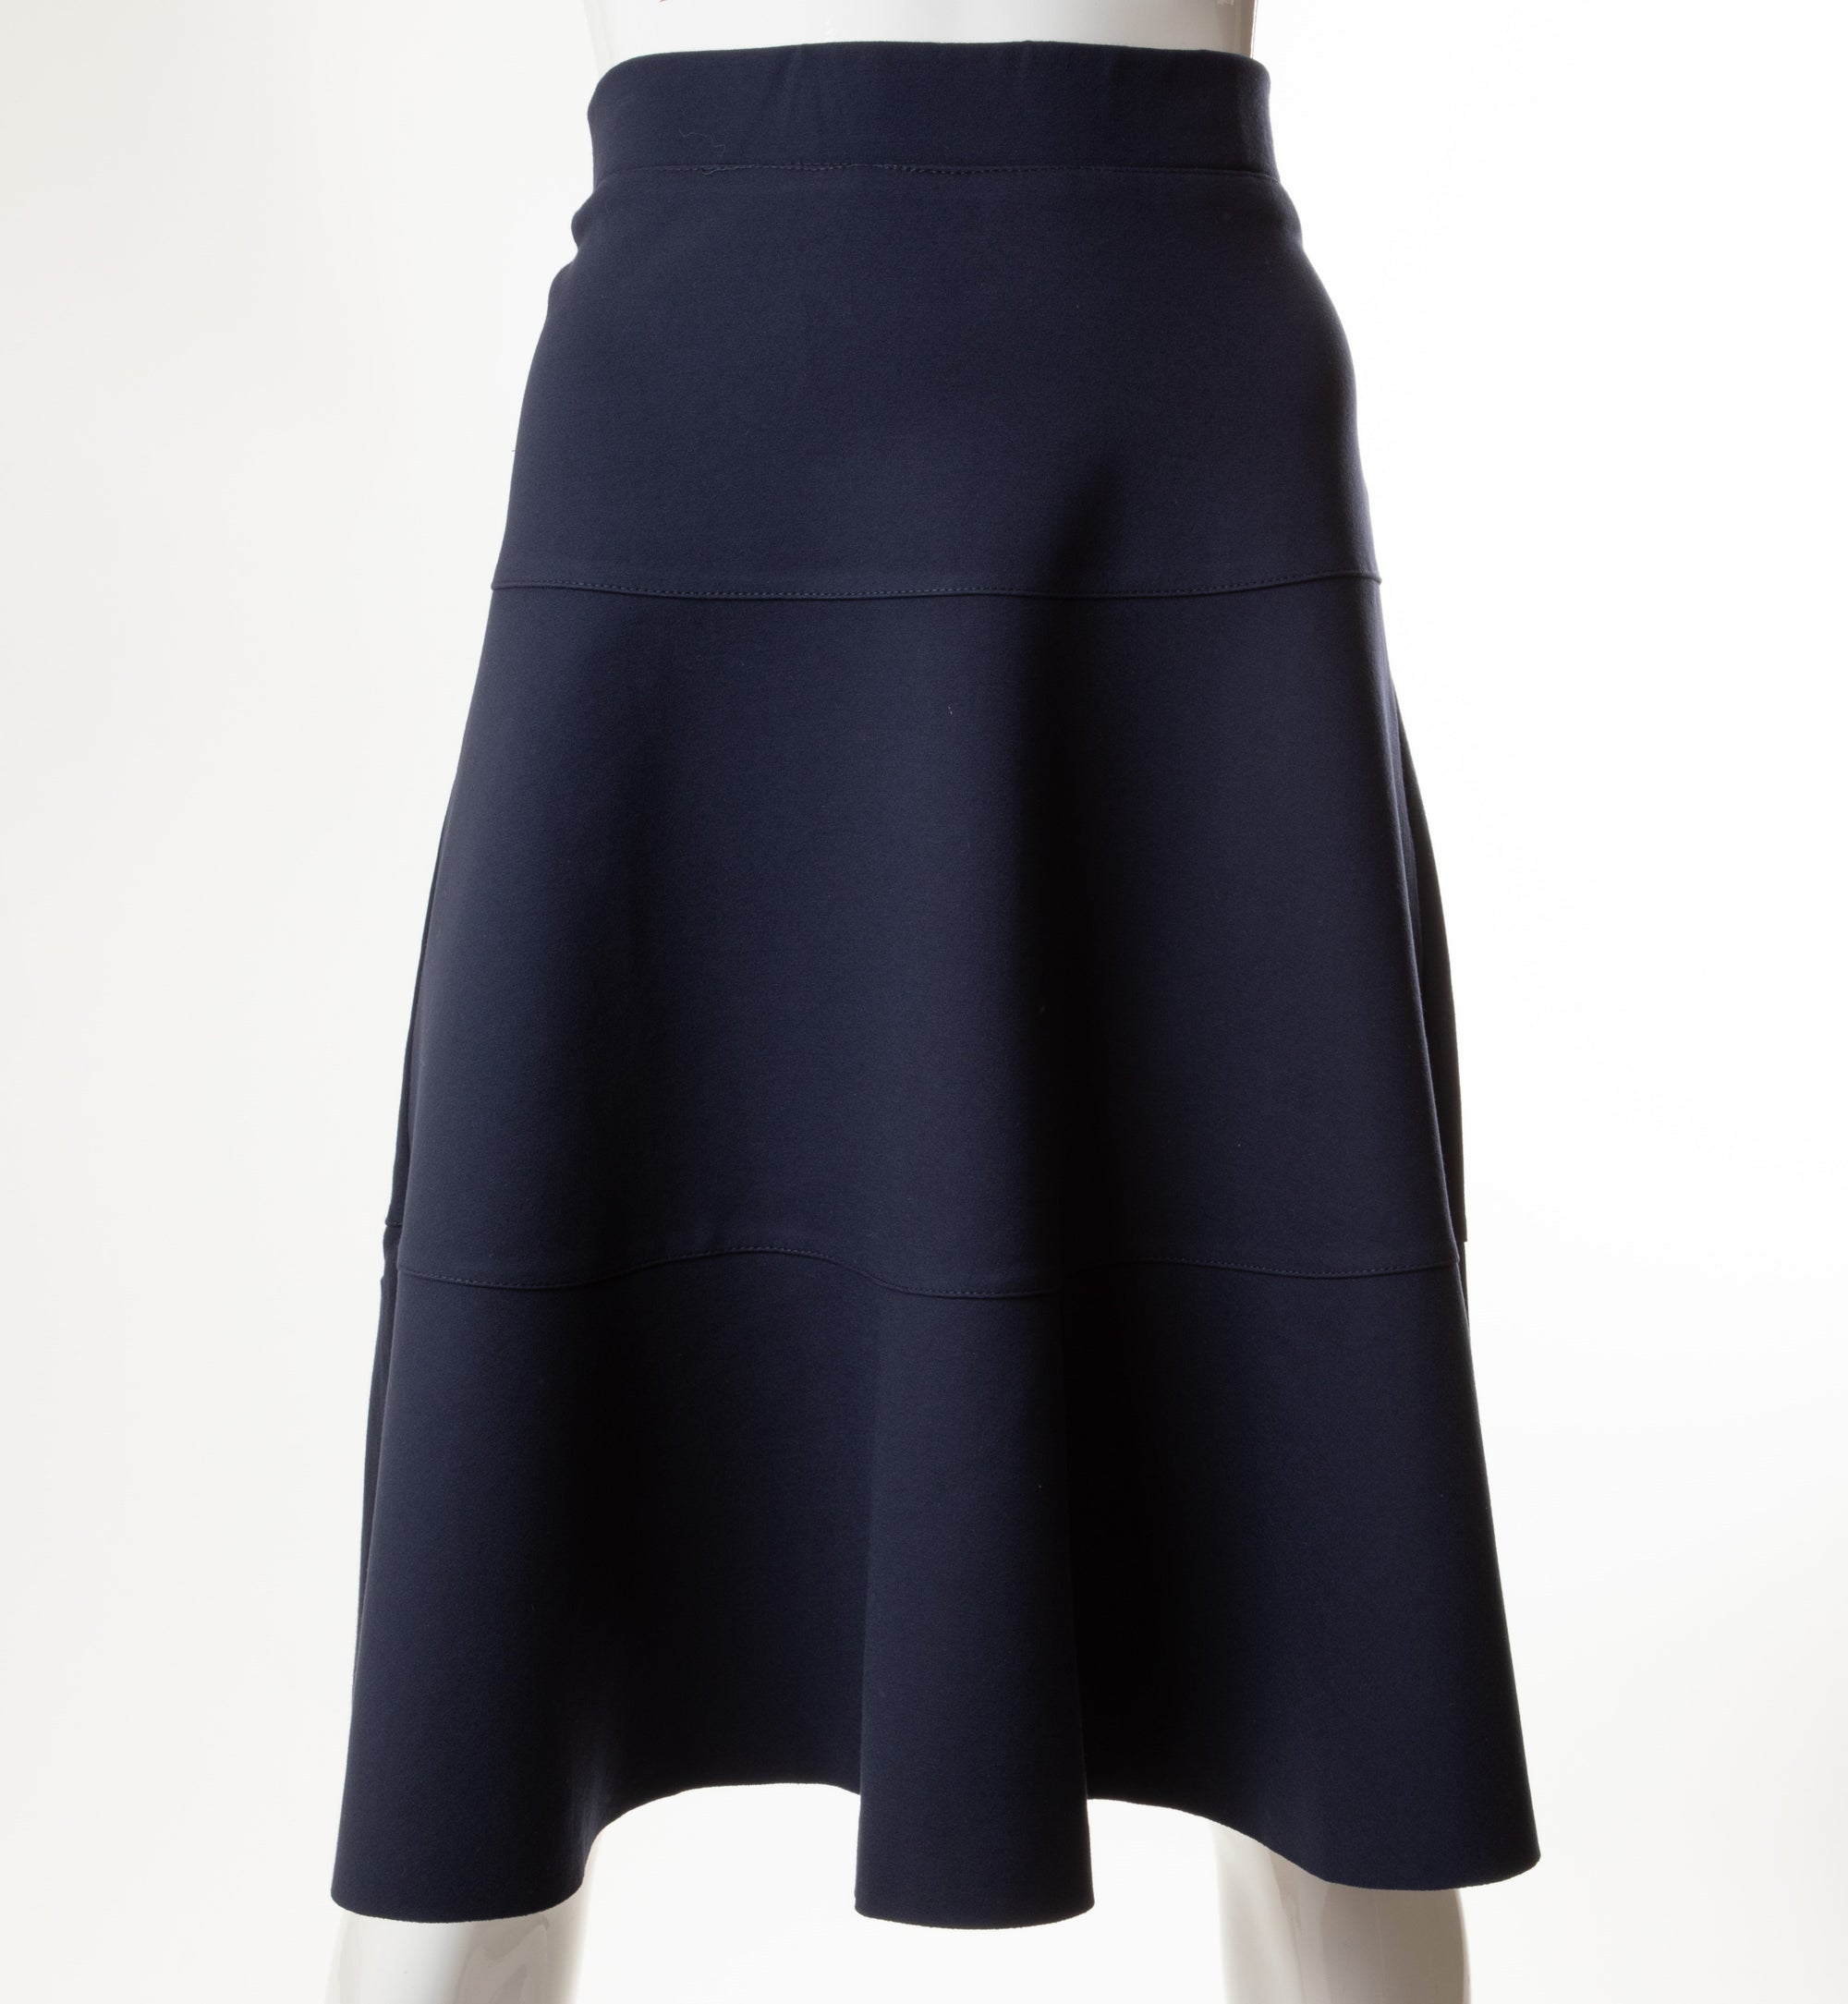 MELI 27 INCHES TIERED PONTE SKIRT NAVY